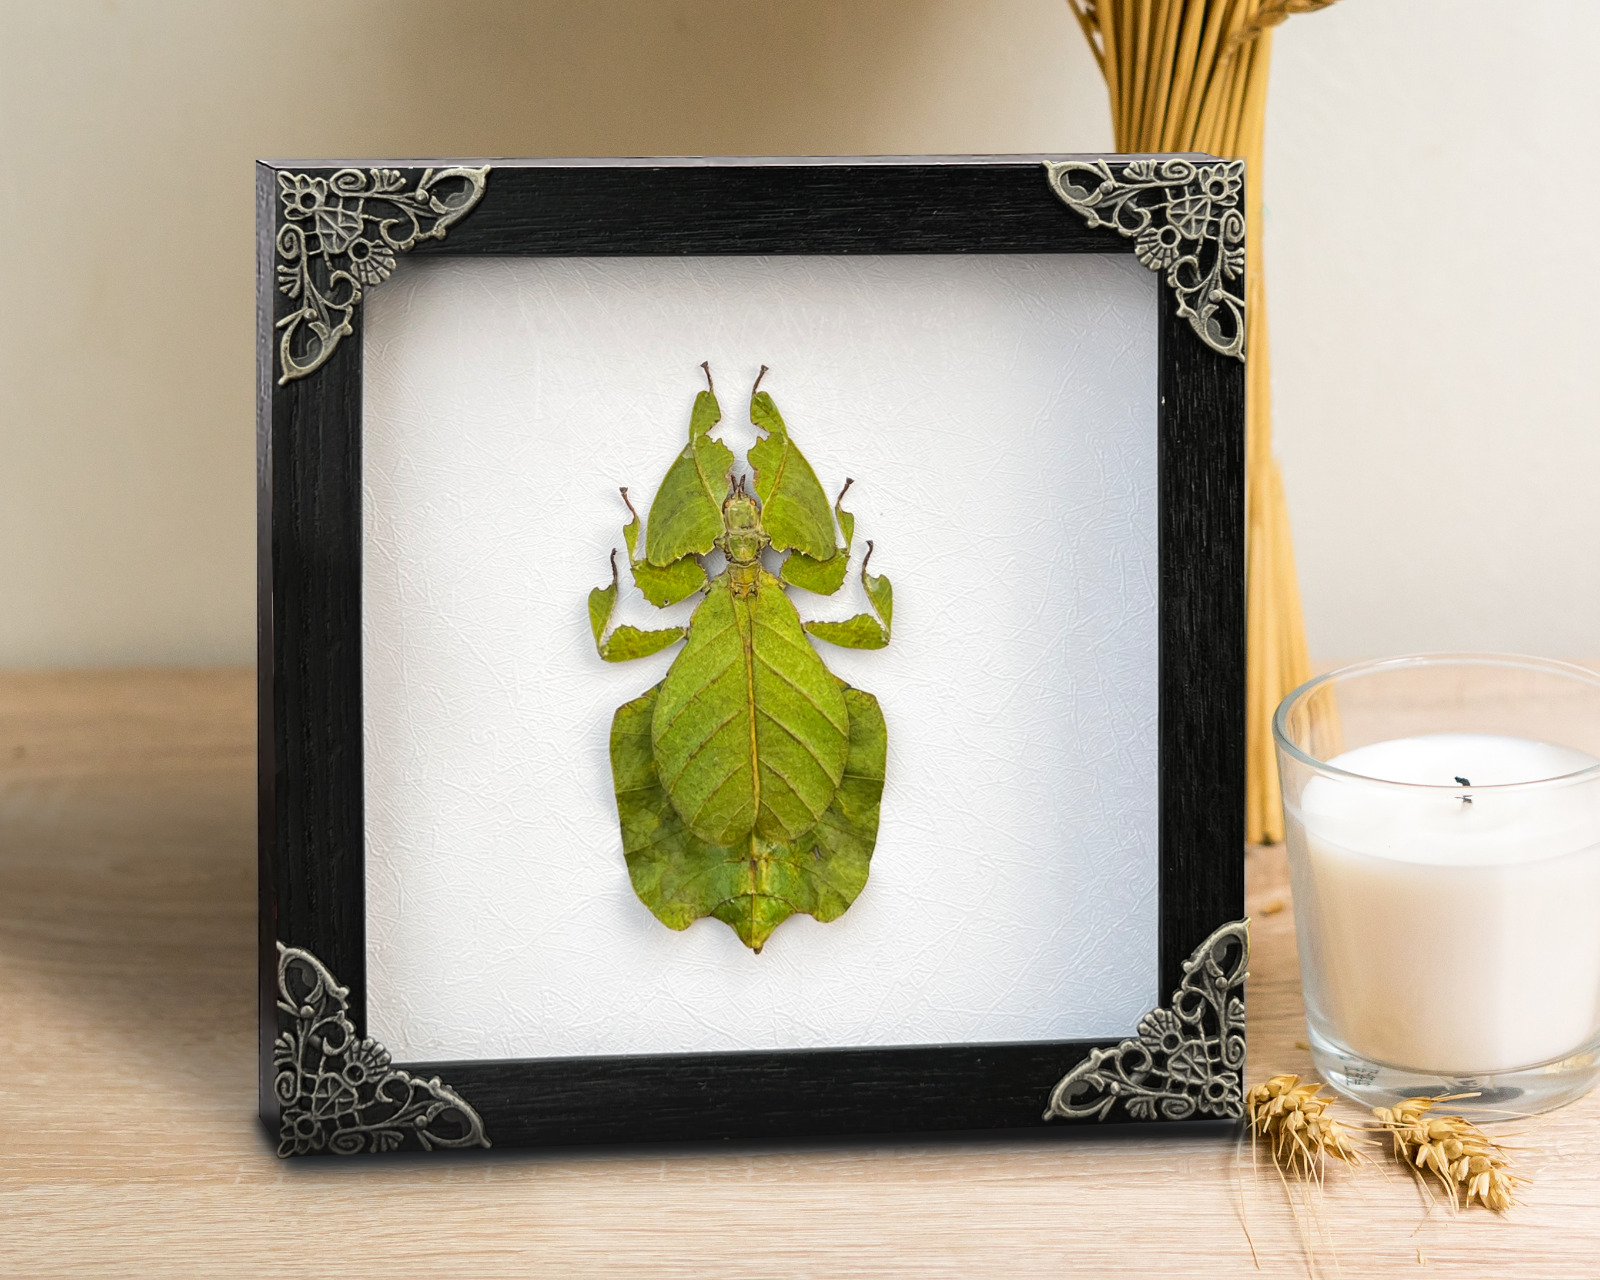 Taxidermy Walking Leaf Insect Framed Real Insect Art Decor Gift For Mom